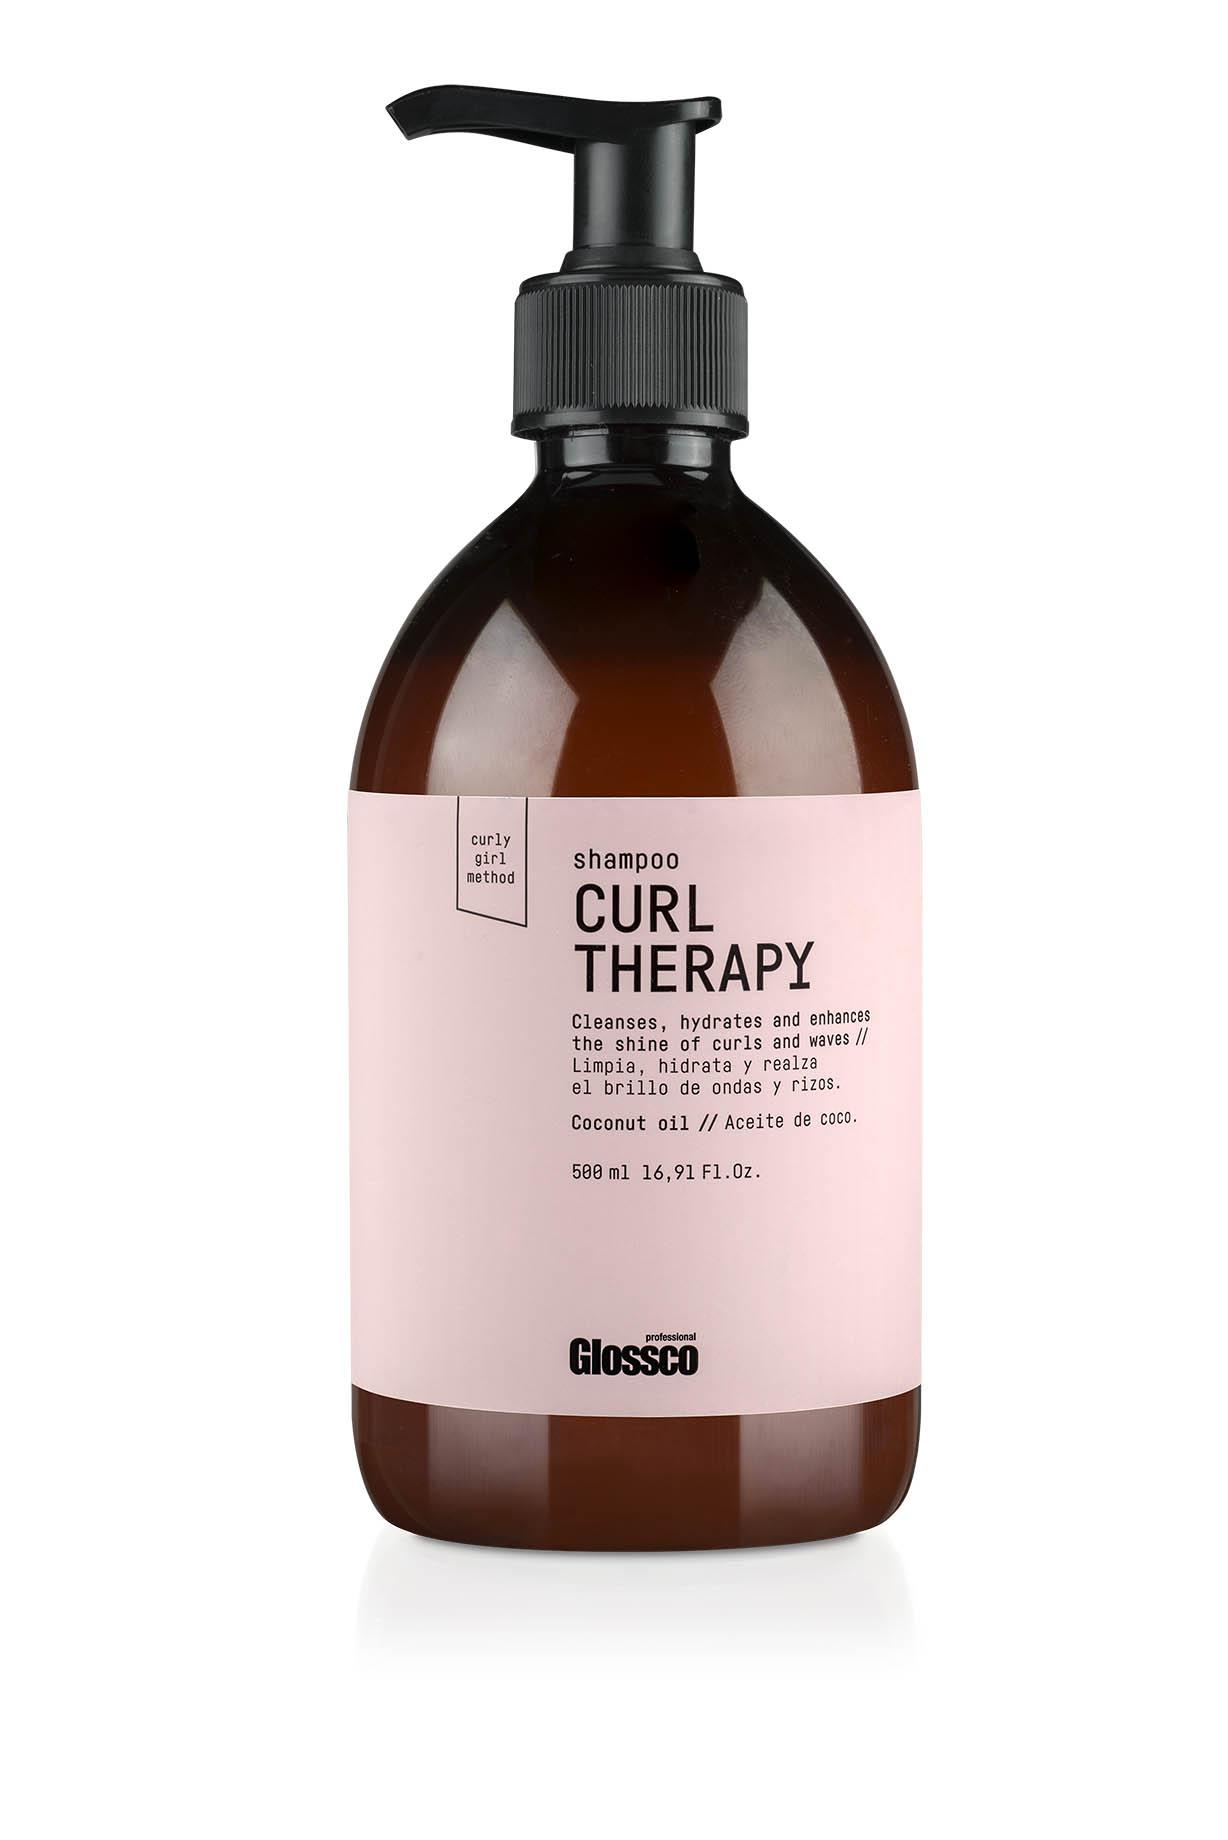 CURLY THERAPY champu glossco 500ML 